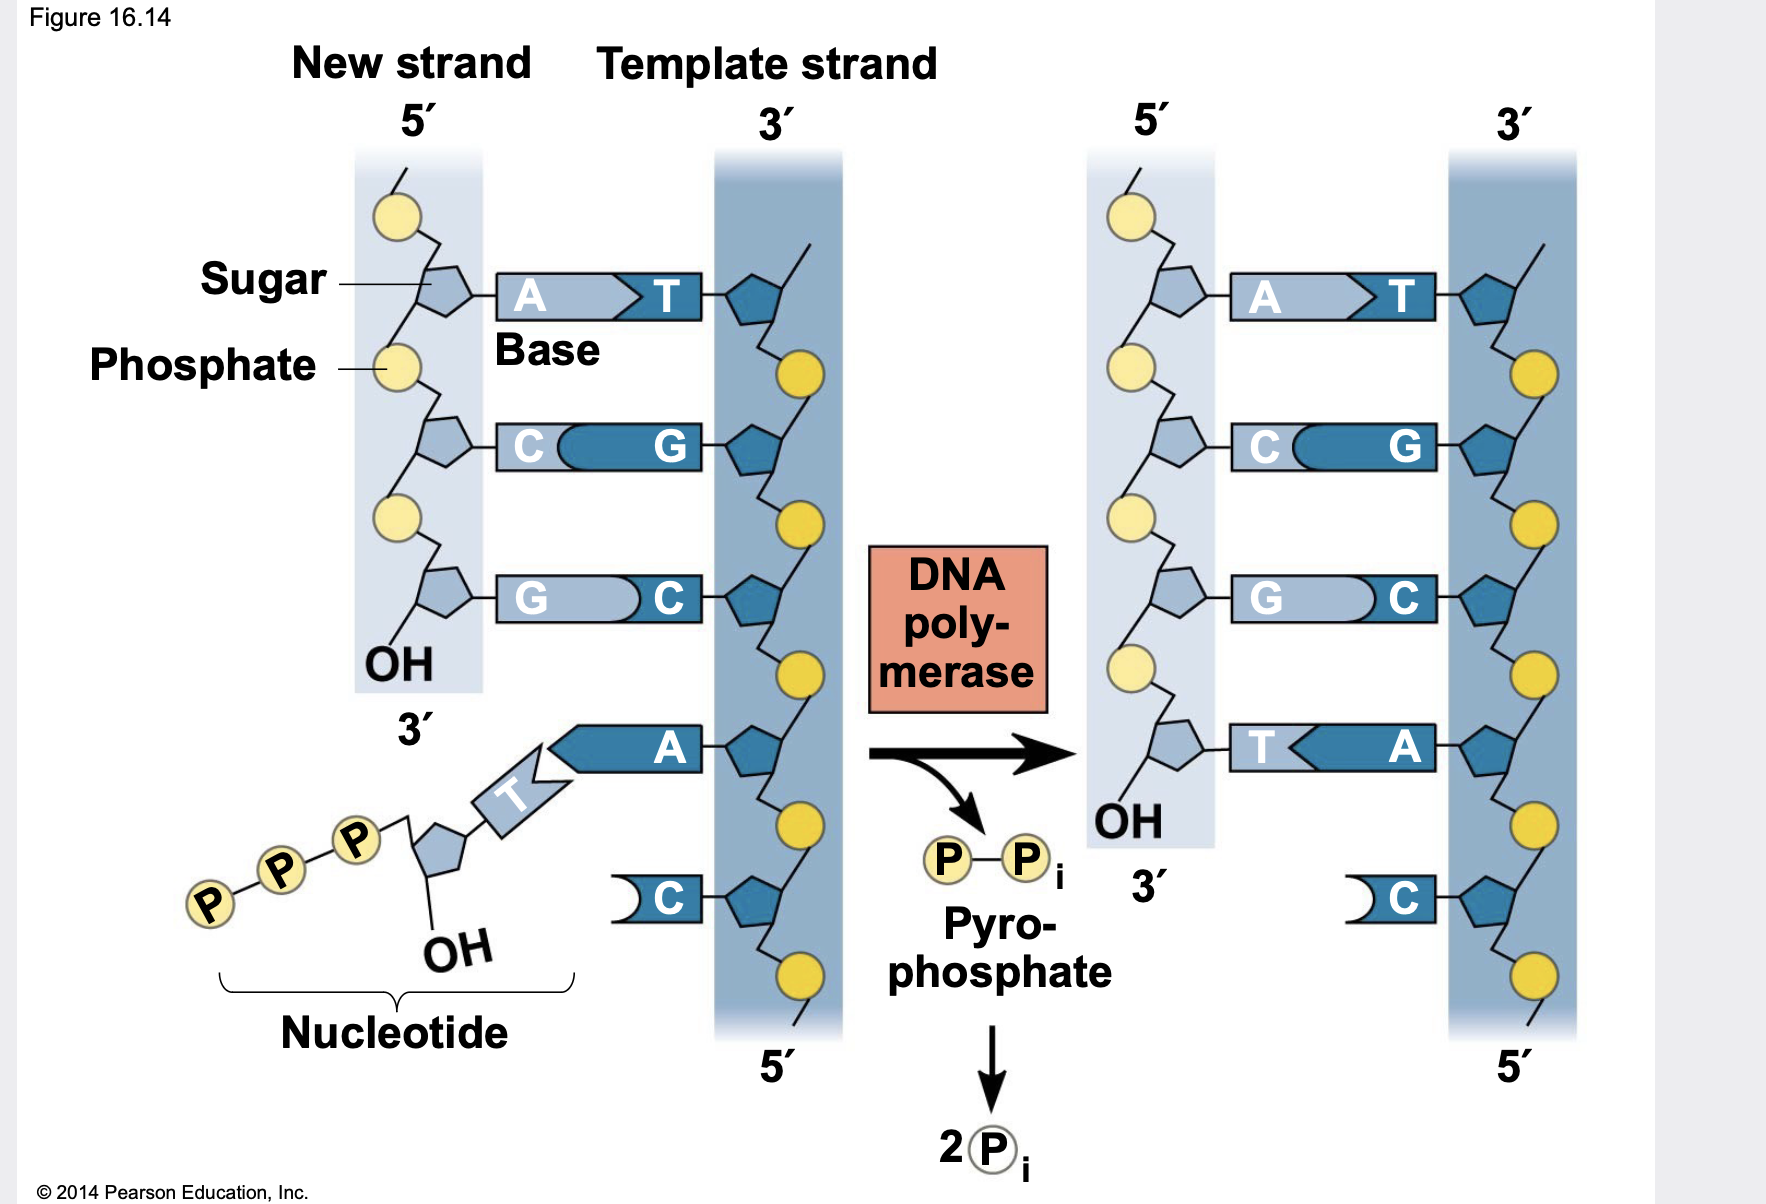 <p>.Enzymes called DNA polymerases synthesize new DNA \n .DNA polymerases require a primer (another nucleic acid to add new nucleotides to) and a DNA template strand. \n .DNA polymerases can add nucleotides only to the 3 ́ end of a primer. \n .DNA polymerases use deoxynucleoside triphosphates, but only one of the three phosphates is added into the DNA chain.</p><p>.Each nucleotide that is added to a growing DNA strand is a deoxynucleoside triphosphate.</p><p>.As each monomer (in triphosphate form) joins the DNA strand, it loses two phosphate groups, and thus only a single phosphate is placed into the sugar- phosphate backbone.</p>